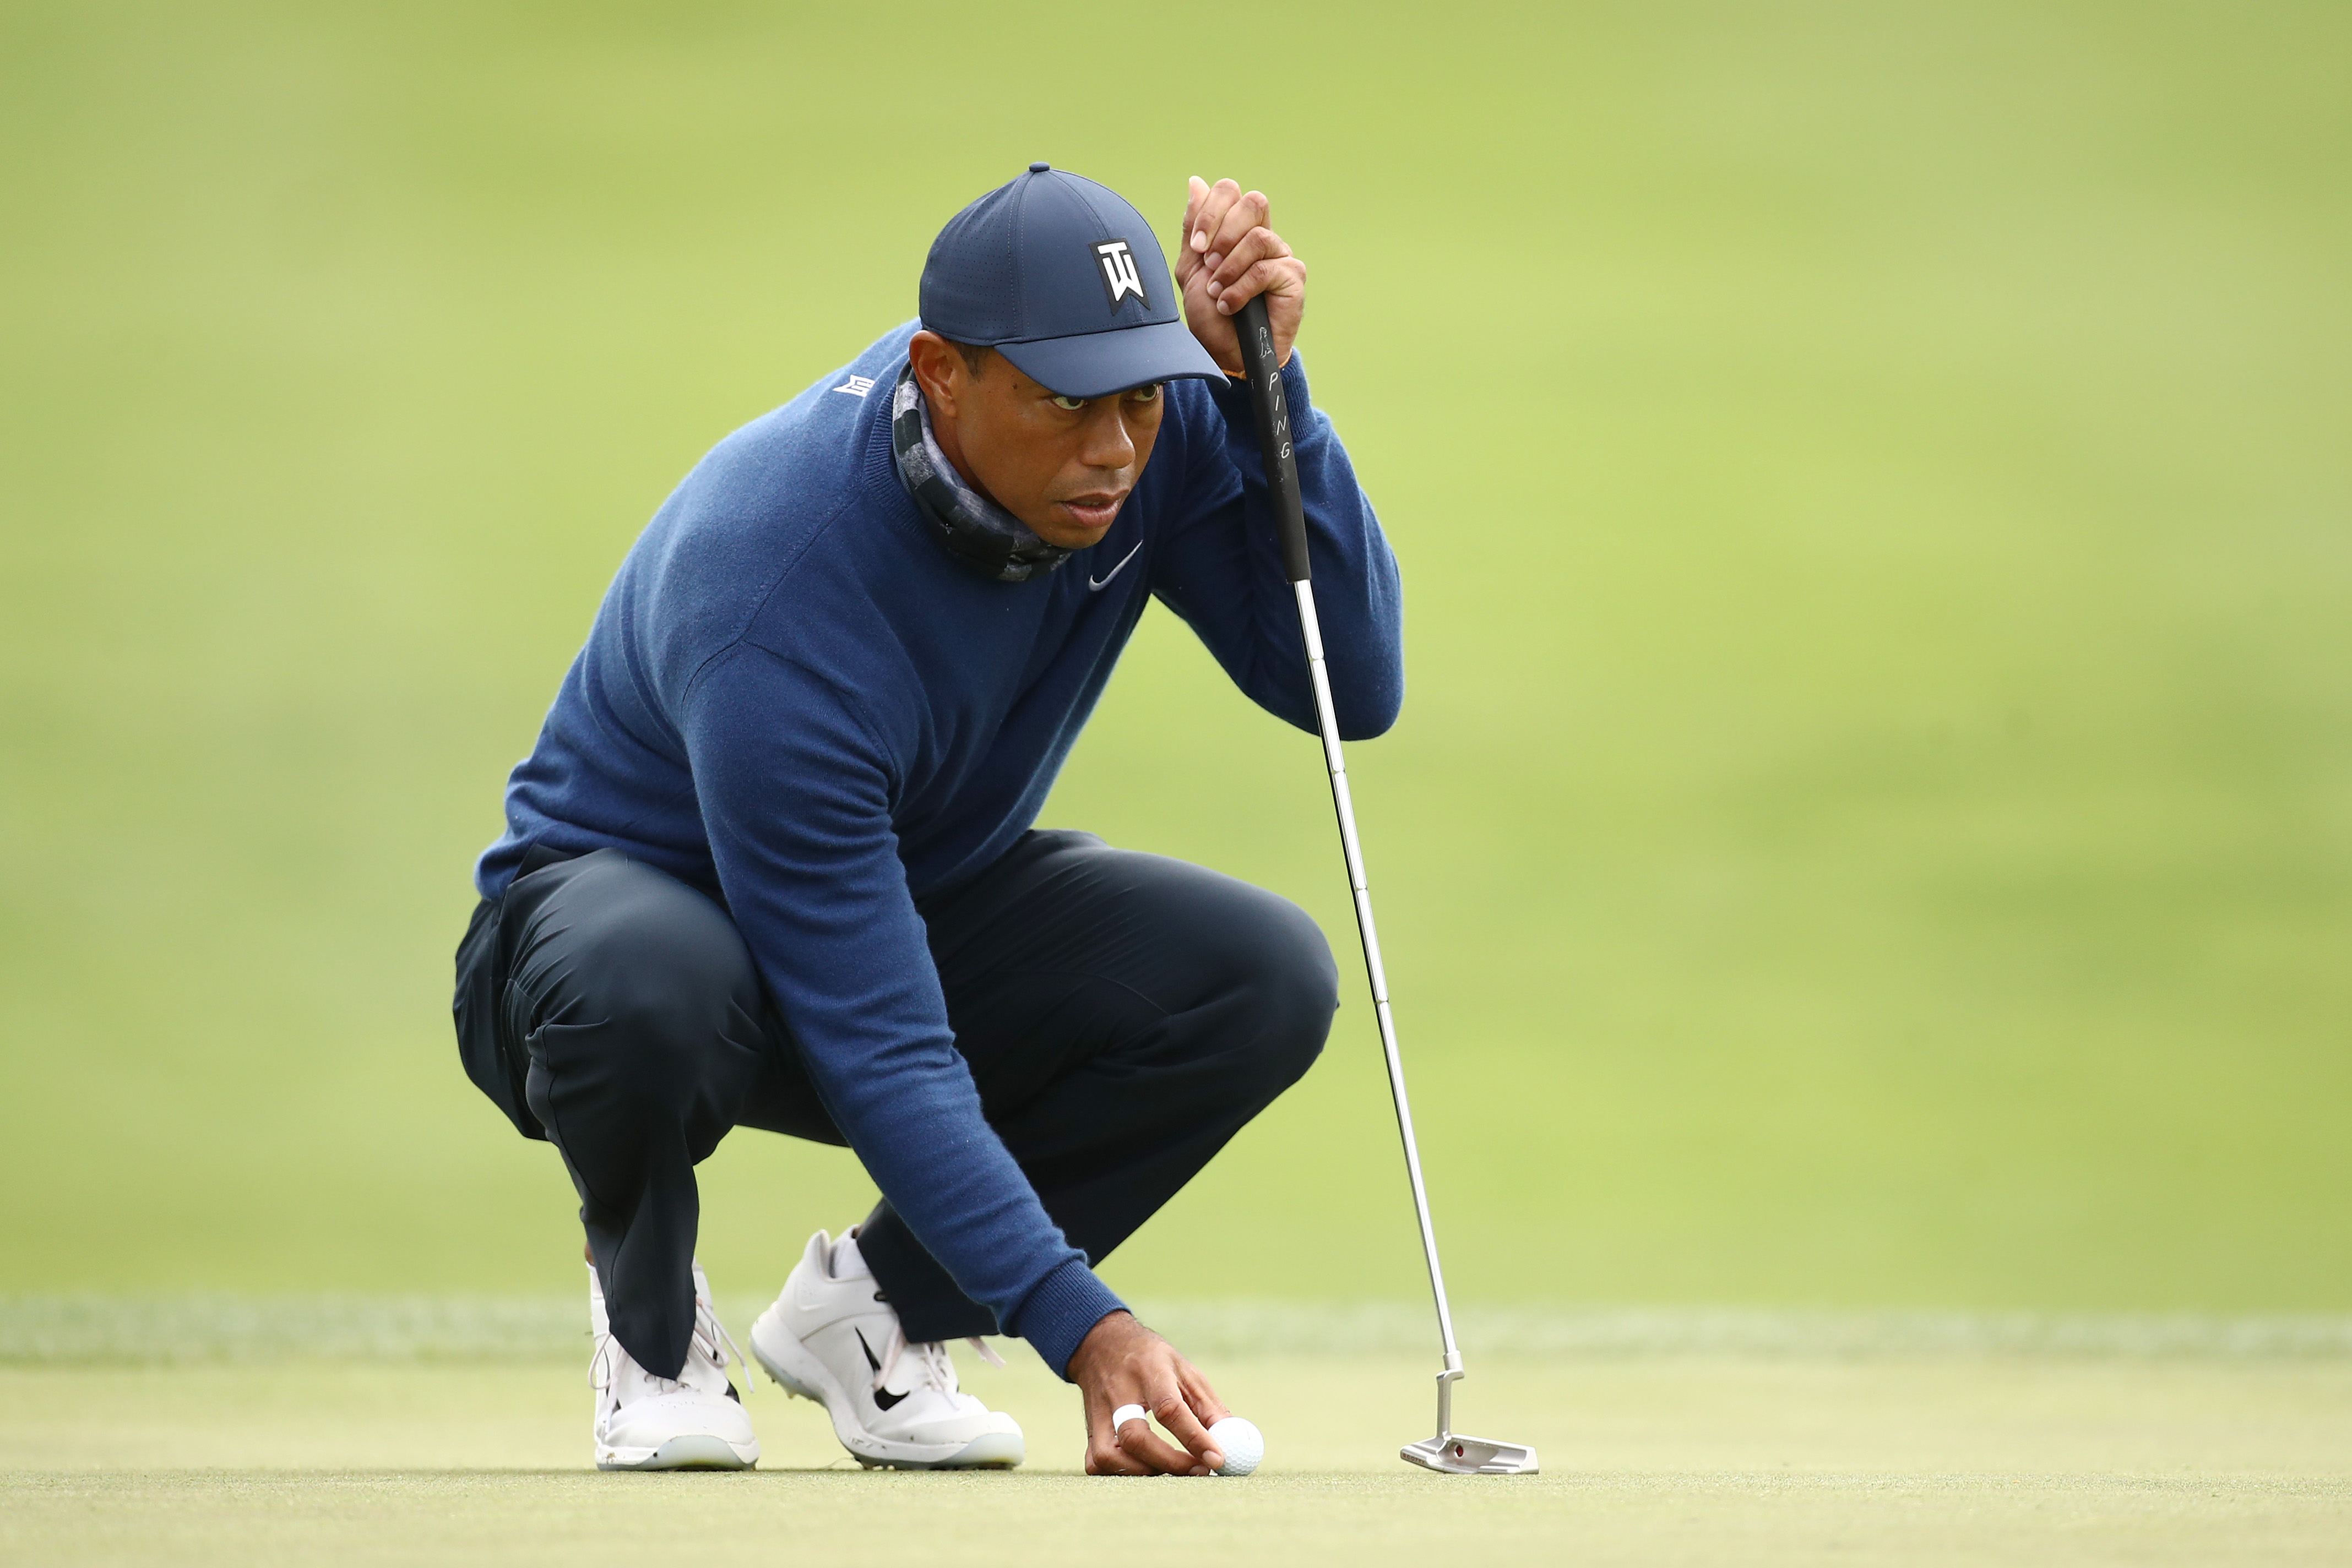 PGA Championship early round coverage (8/7/20) Free live stream of Fridays featured groups including Tiger Woods, Brooks Koepka, Justin Thomas, more